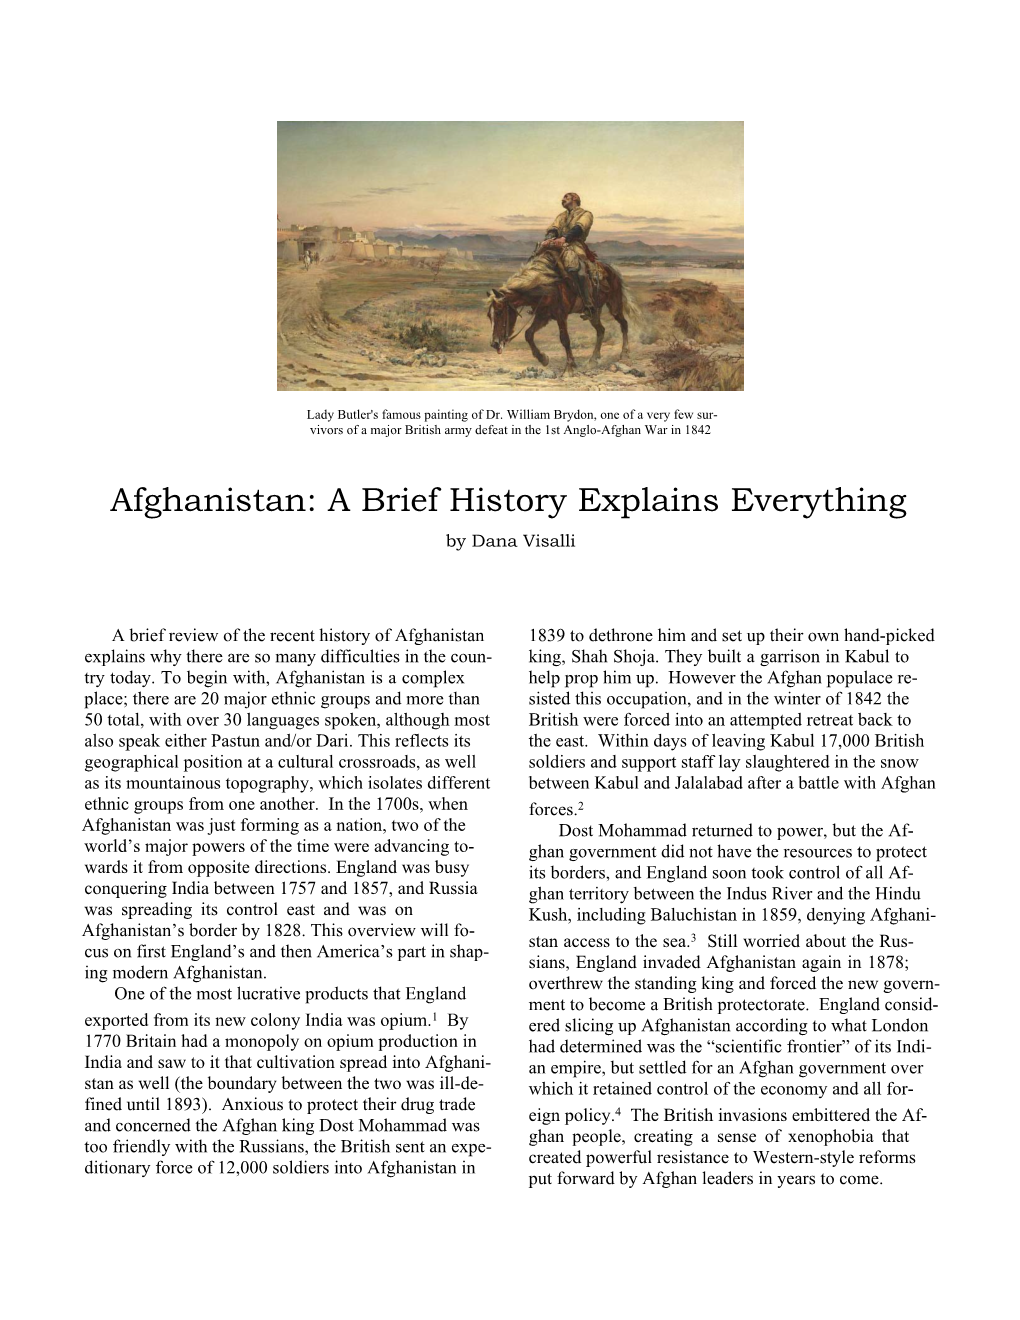 Afghanistan: a Brief History Explains Everything